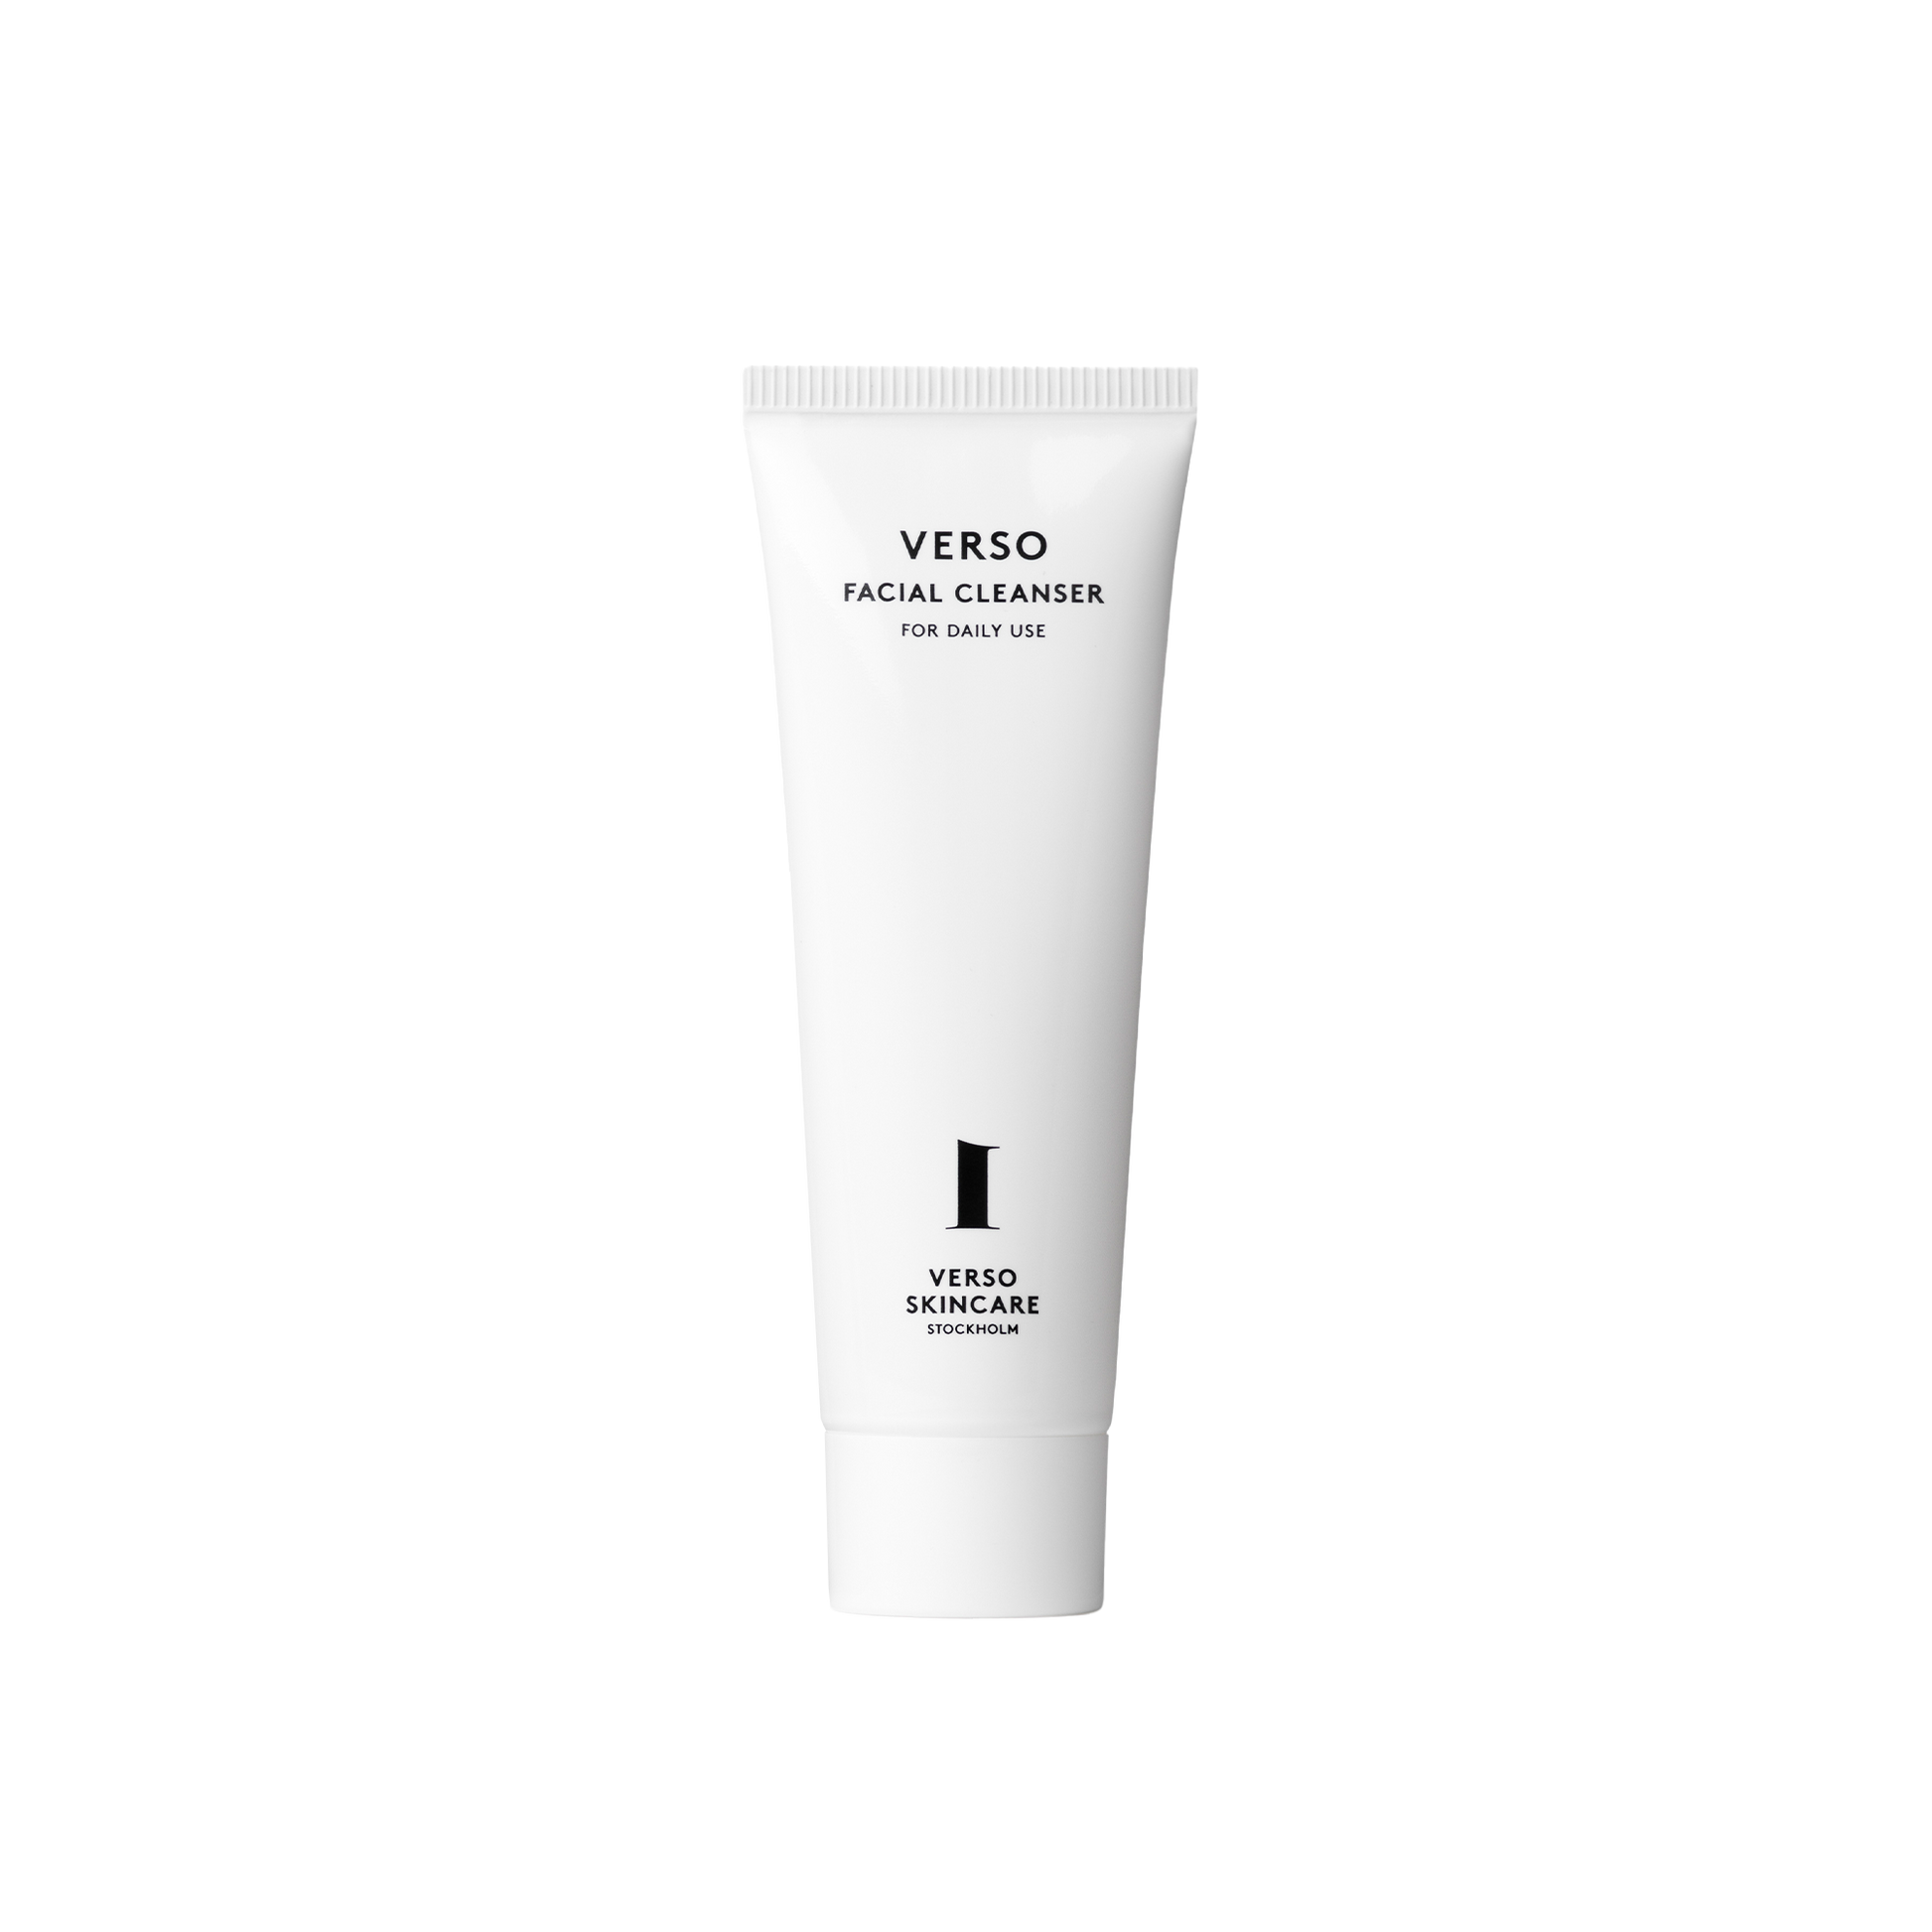 Verso Facial Cleanser: Gently cleanses the skin leaving it balanced and ready for the next step of your skincare routine. Transforms from a creamy texture to a light lotion with a slight lather when mixed with water. This formulation contains enzymes, a mild exfoliator, to cleanse the skin effectively.